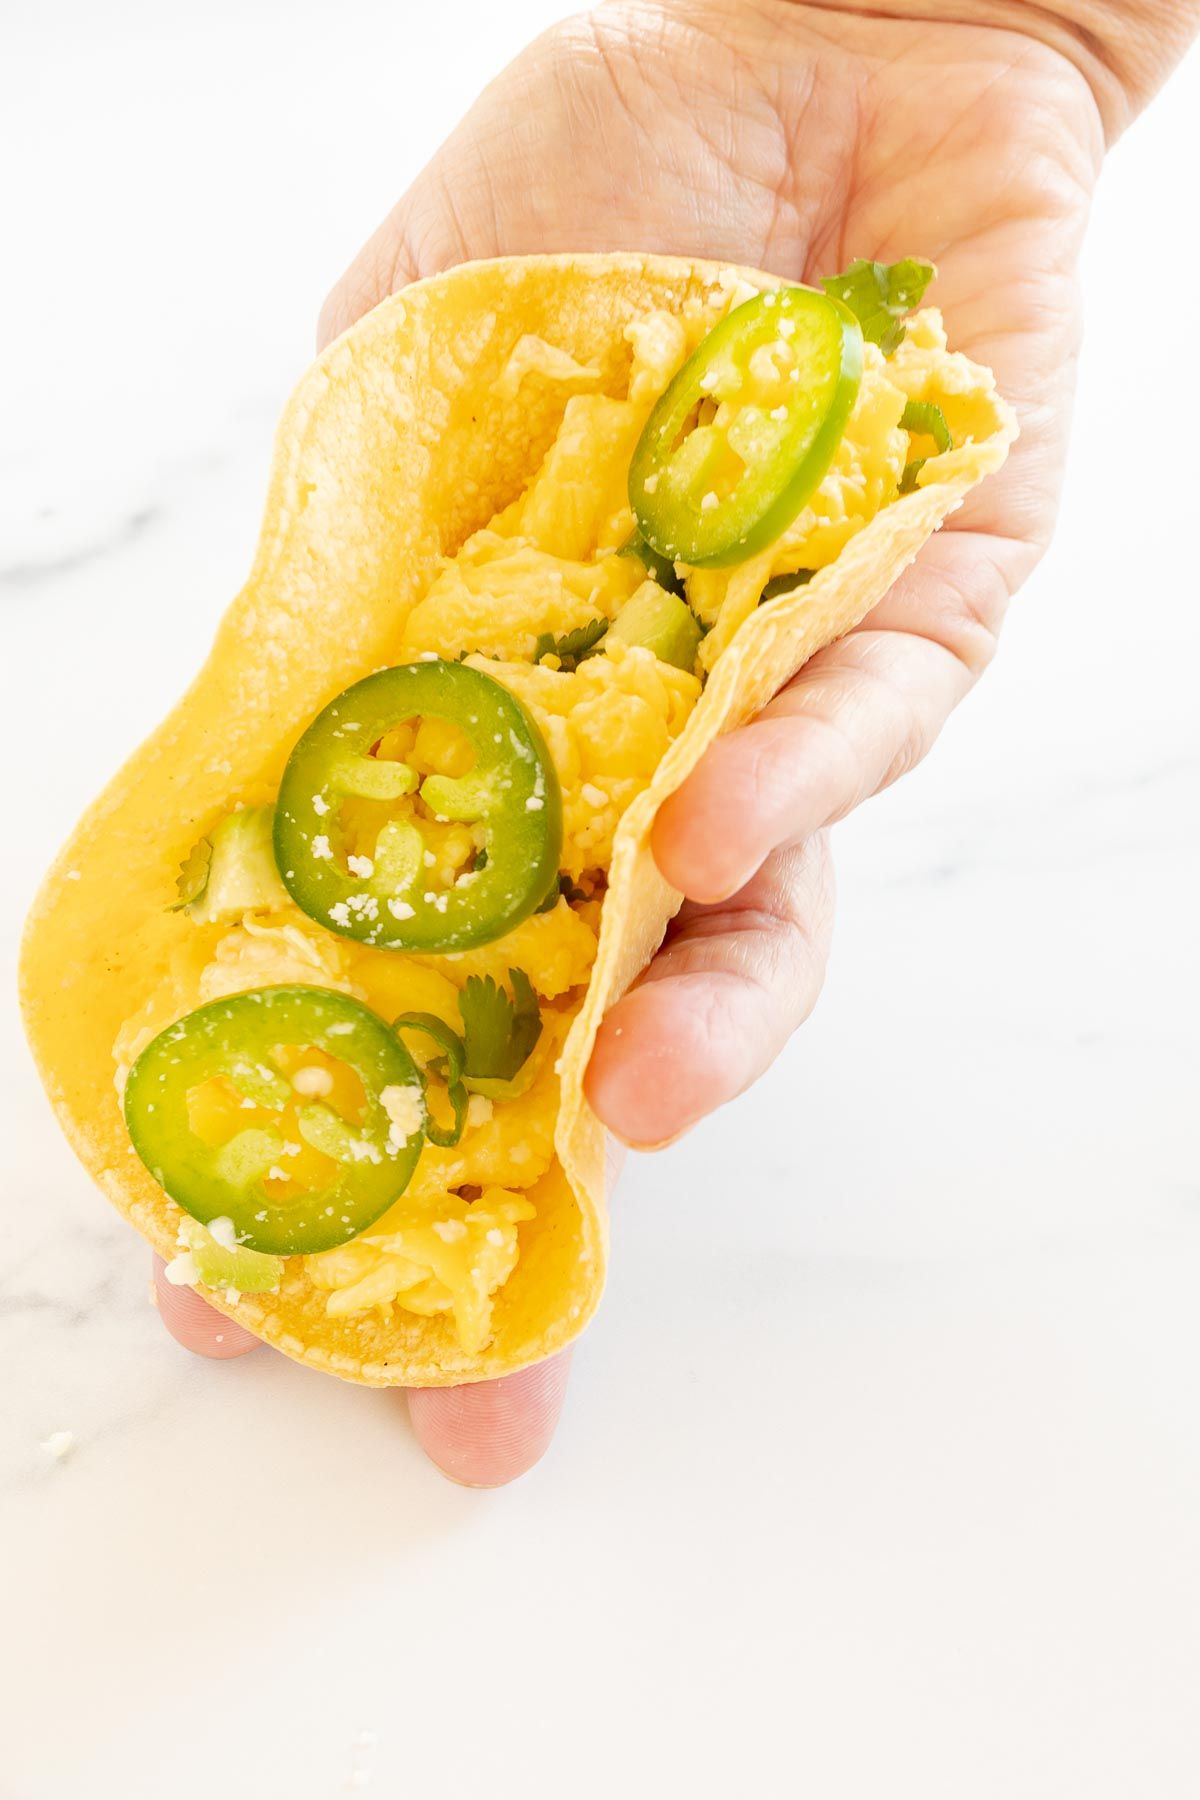 A hand holding a breakfast taco topped with sliced jalapenos